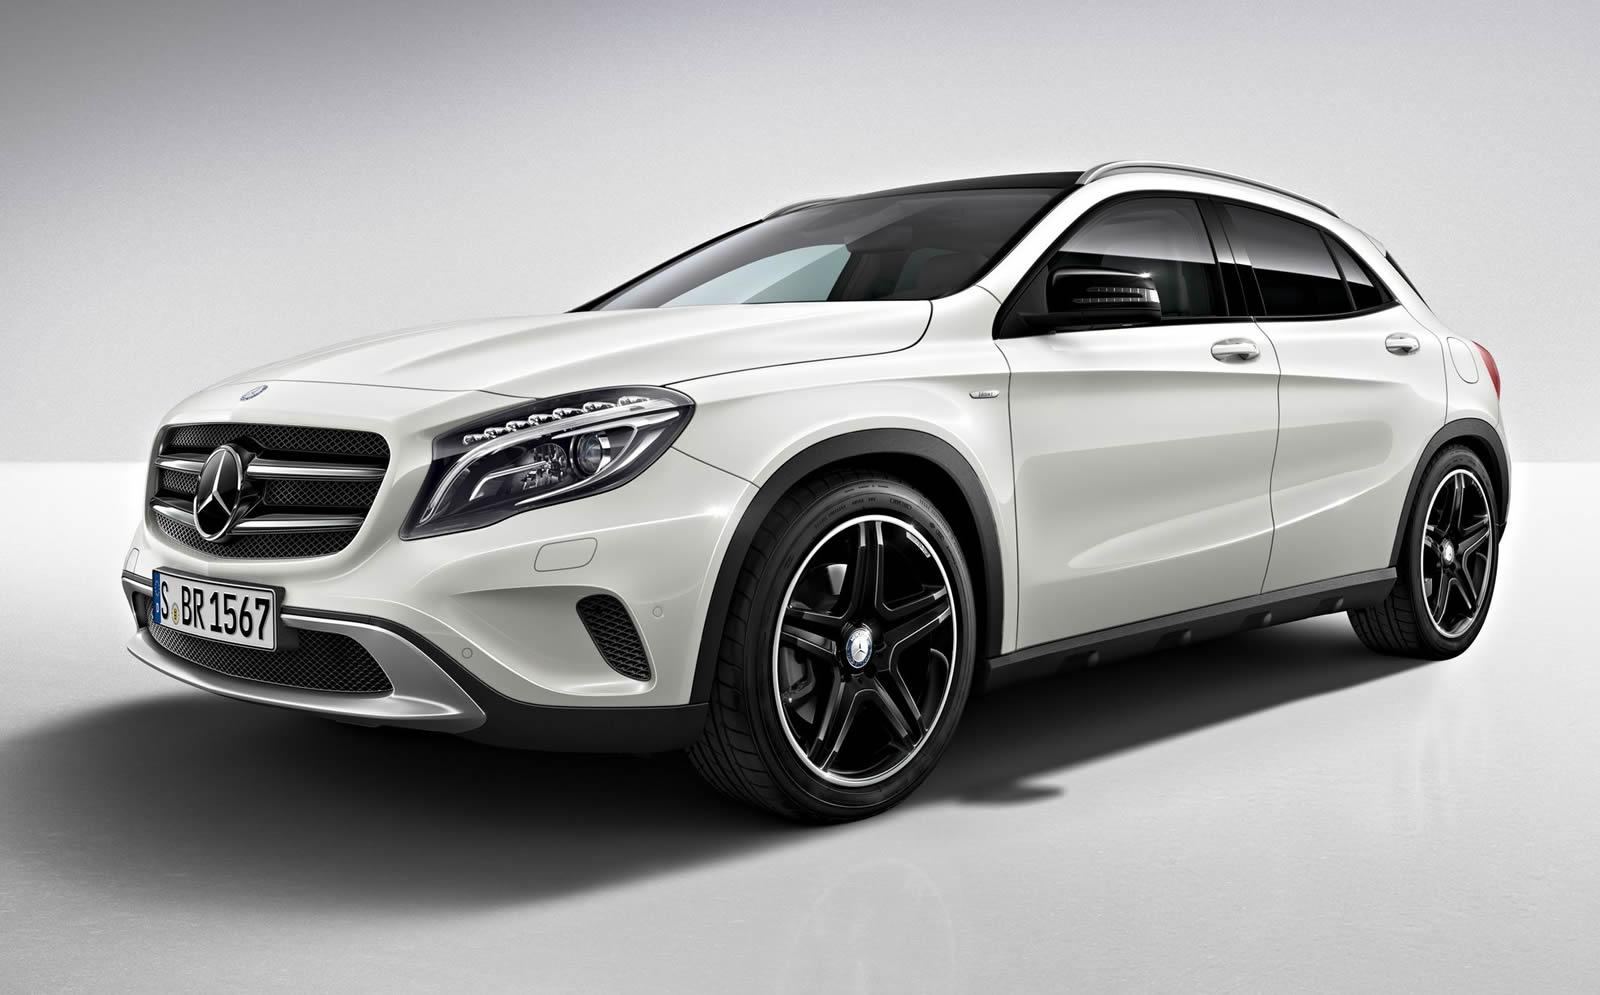 Mercedes Benz GLA Edition 1 2013 photo 105300 pictures at High resolution